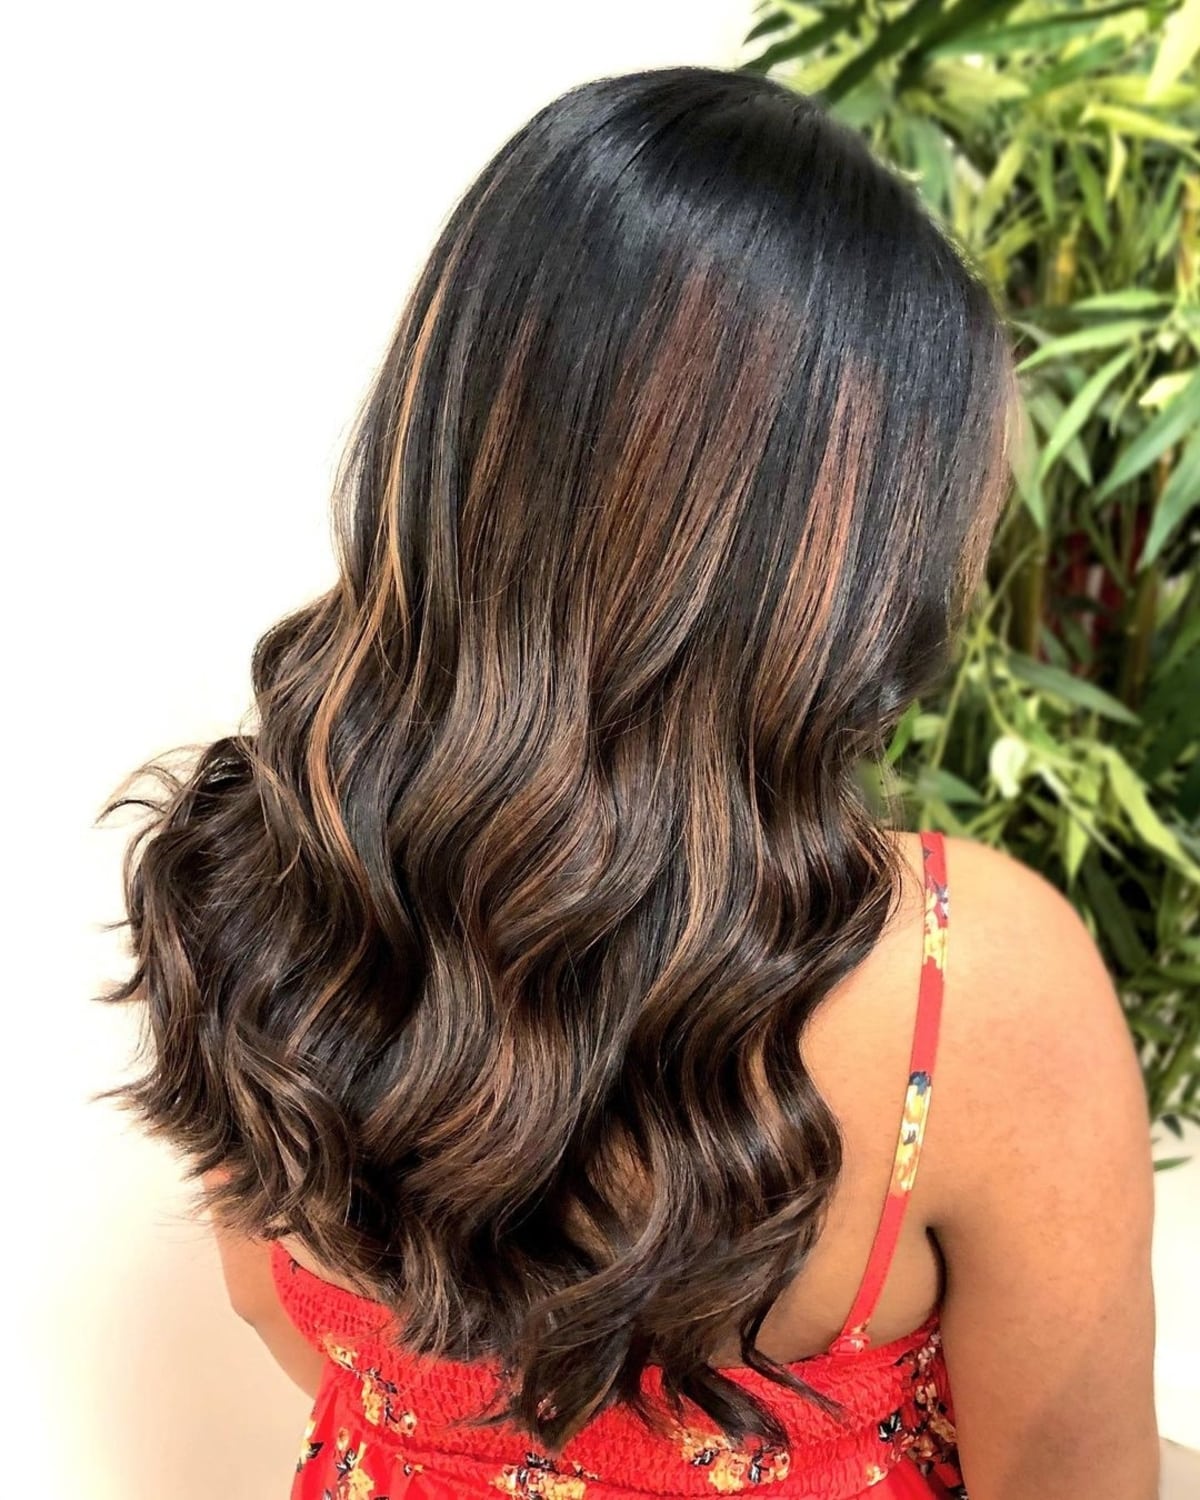 35 Inspiring Ways to Get Black Hair with Highlights